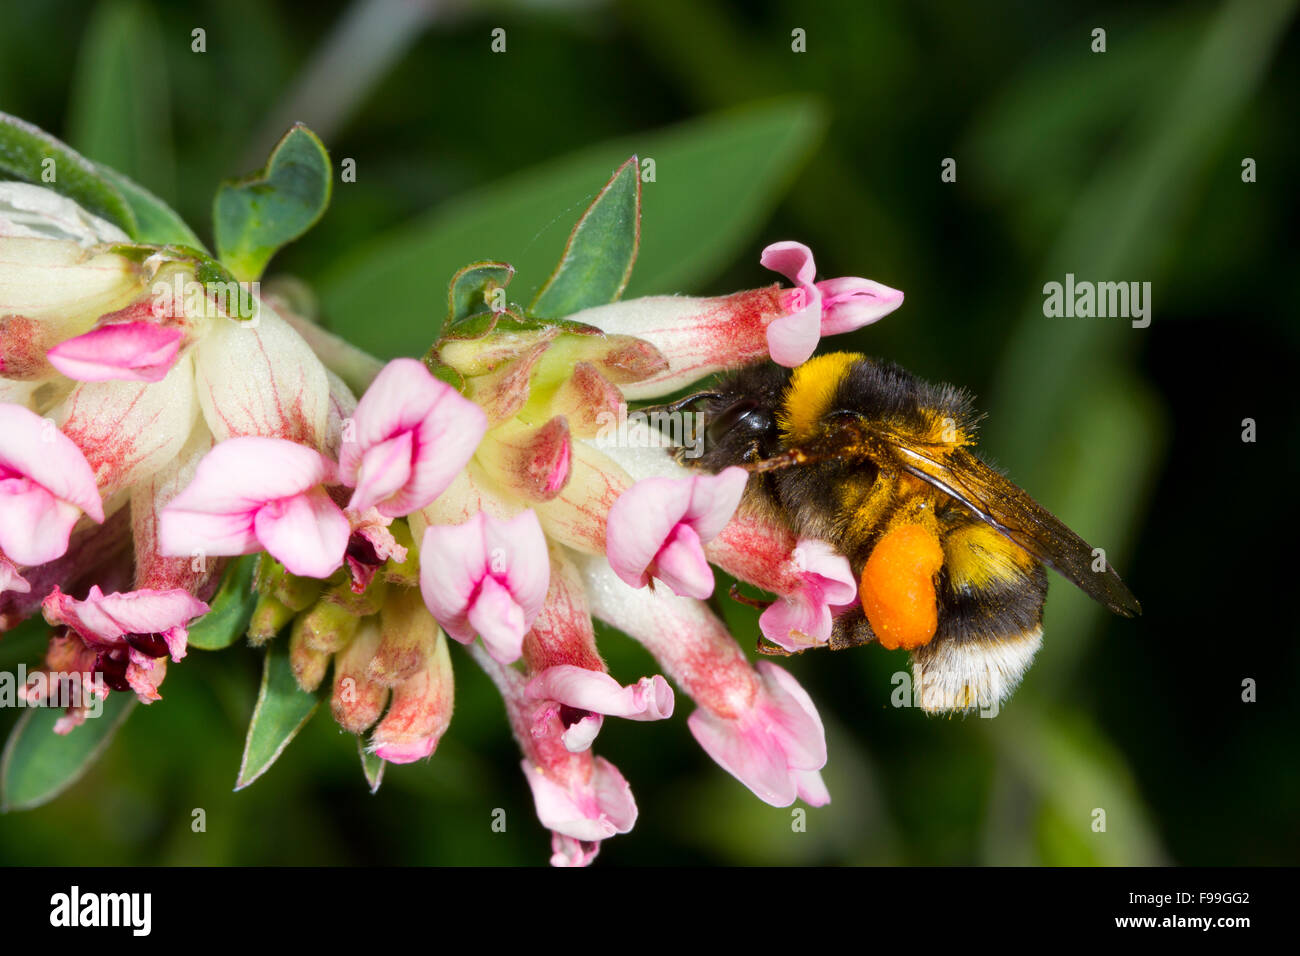 White-tailed Bumblebee (Bombus lucorum s.l.) adult worker already laden with pollen nectar robbing from flowers. Stock Photo